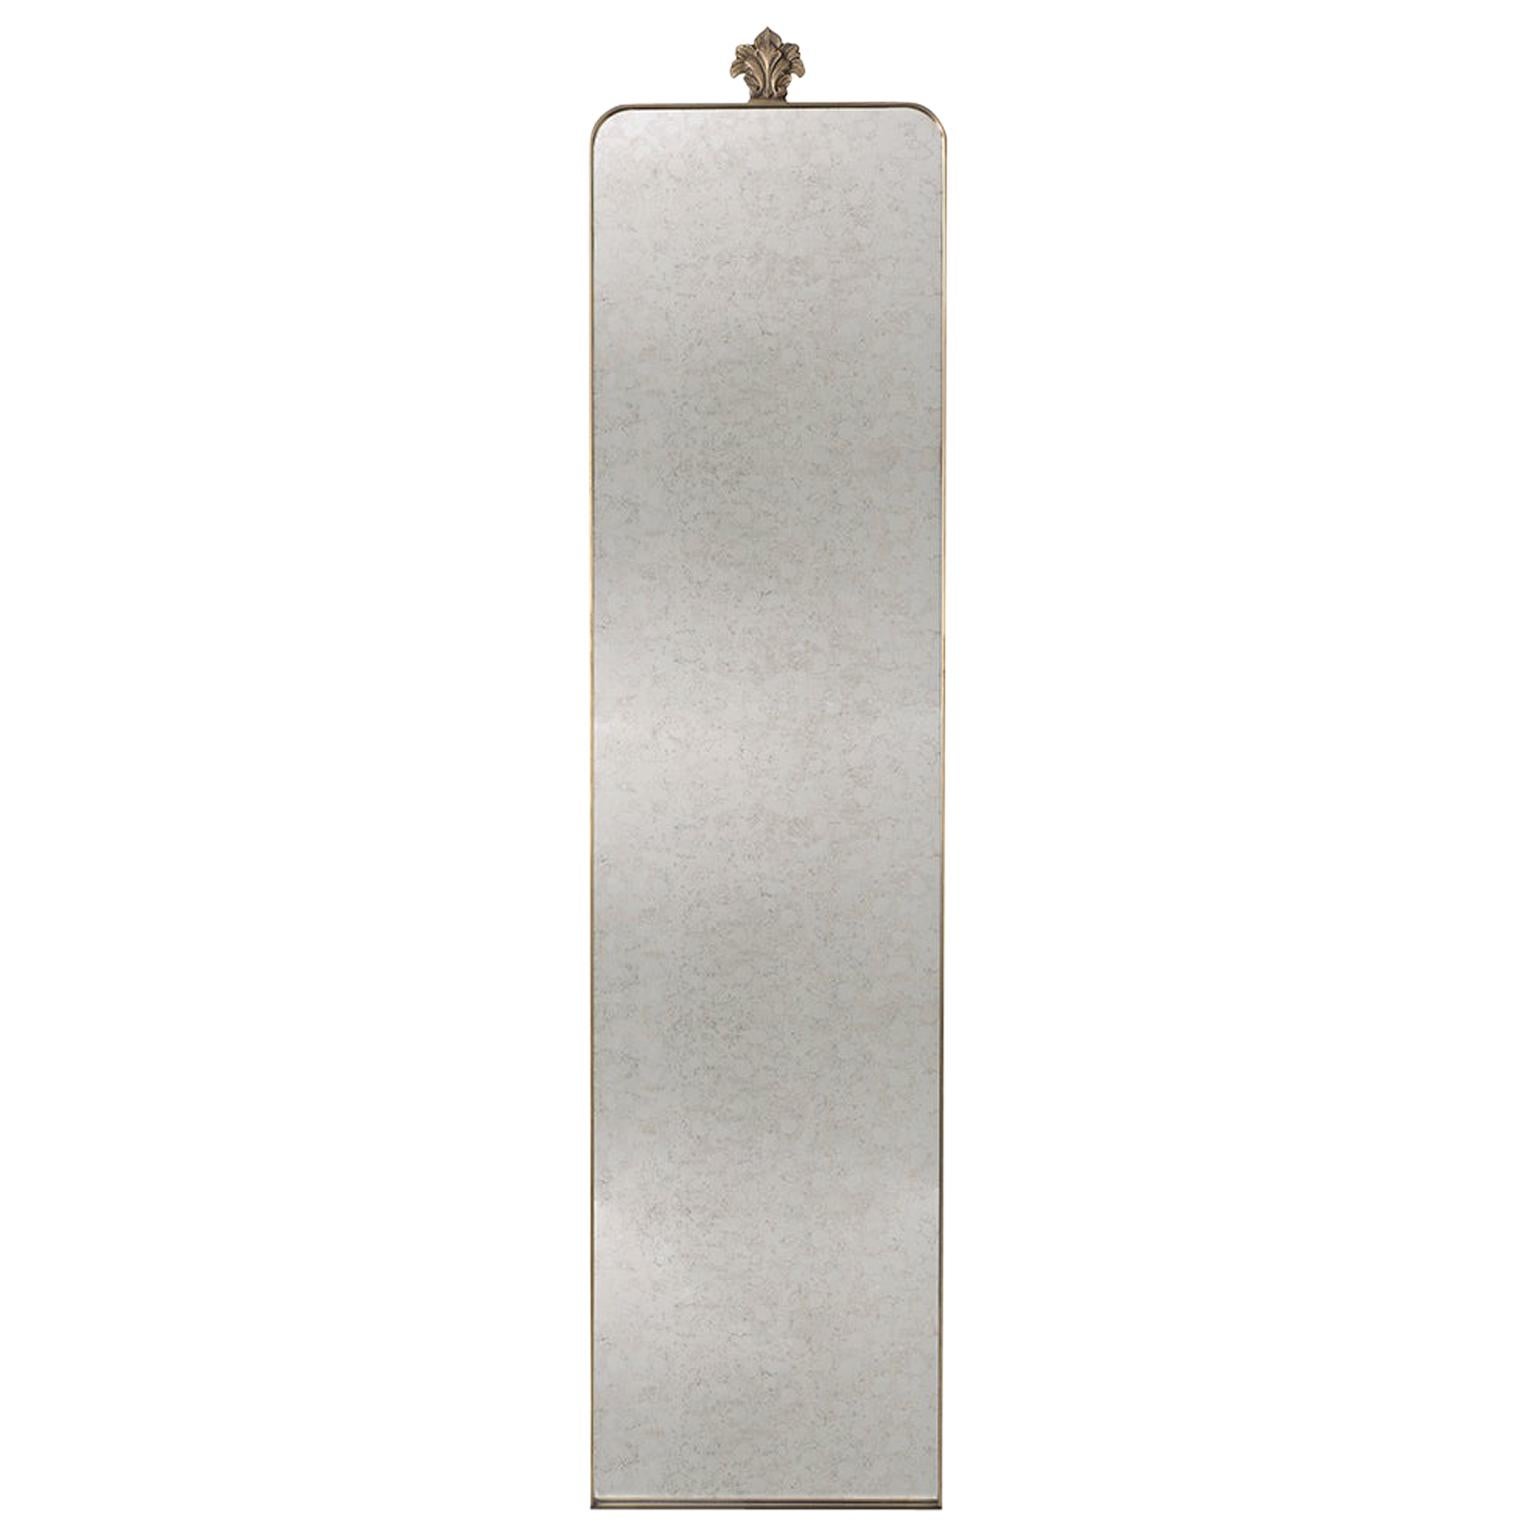 21st Century Princess Wall Mirror, Full Length Mirror in Aged Brass, Aged Mirror